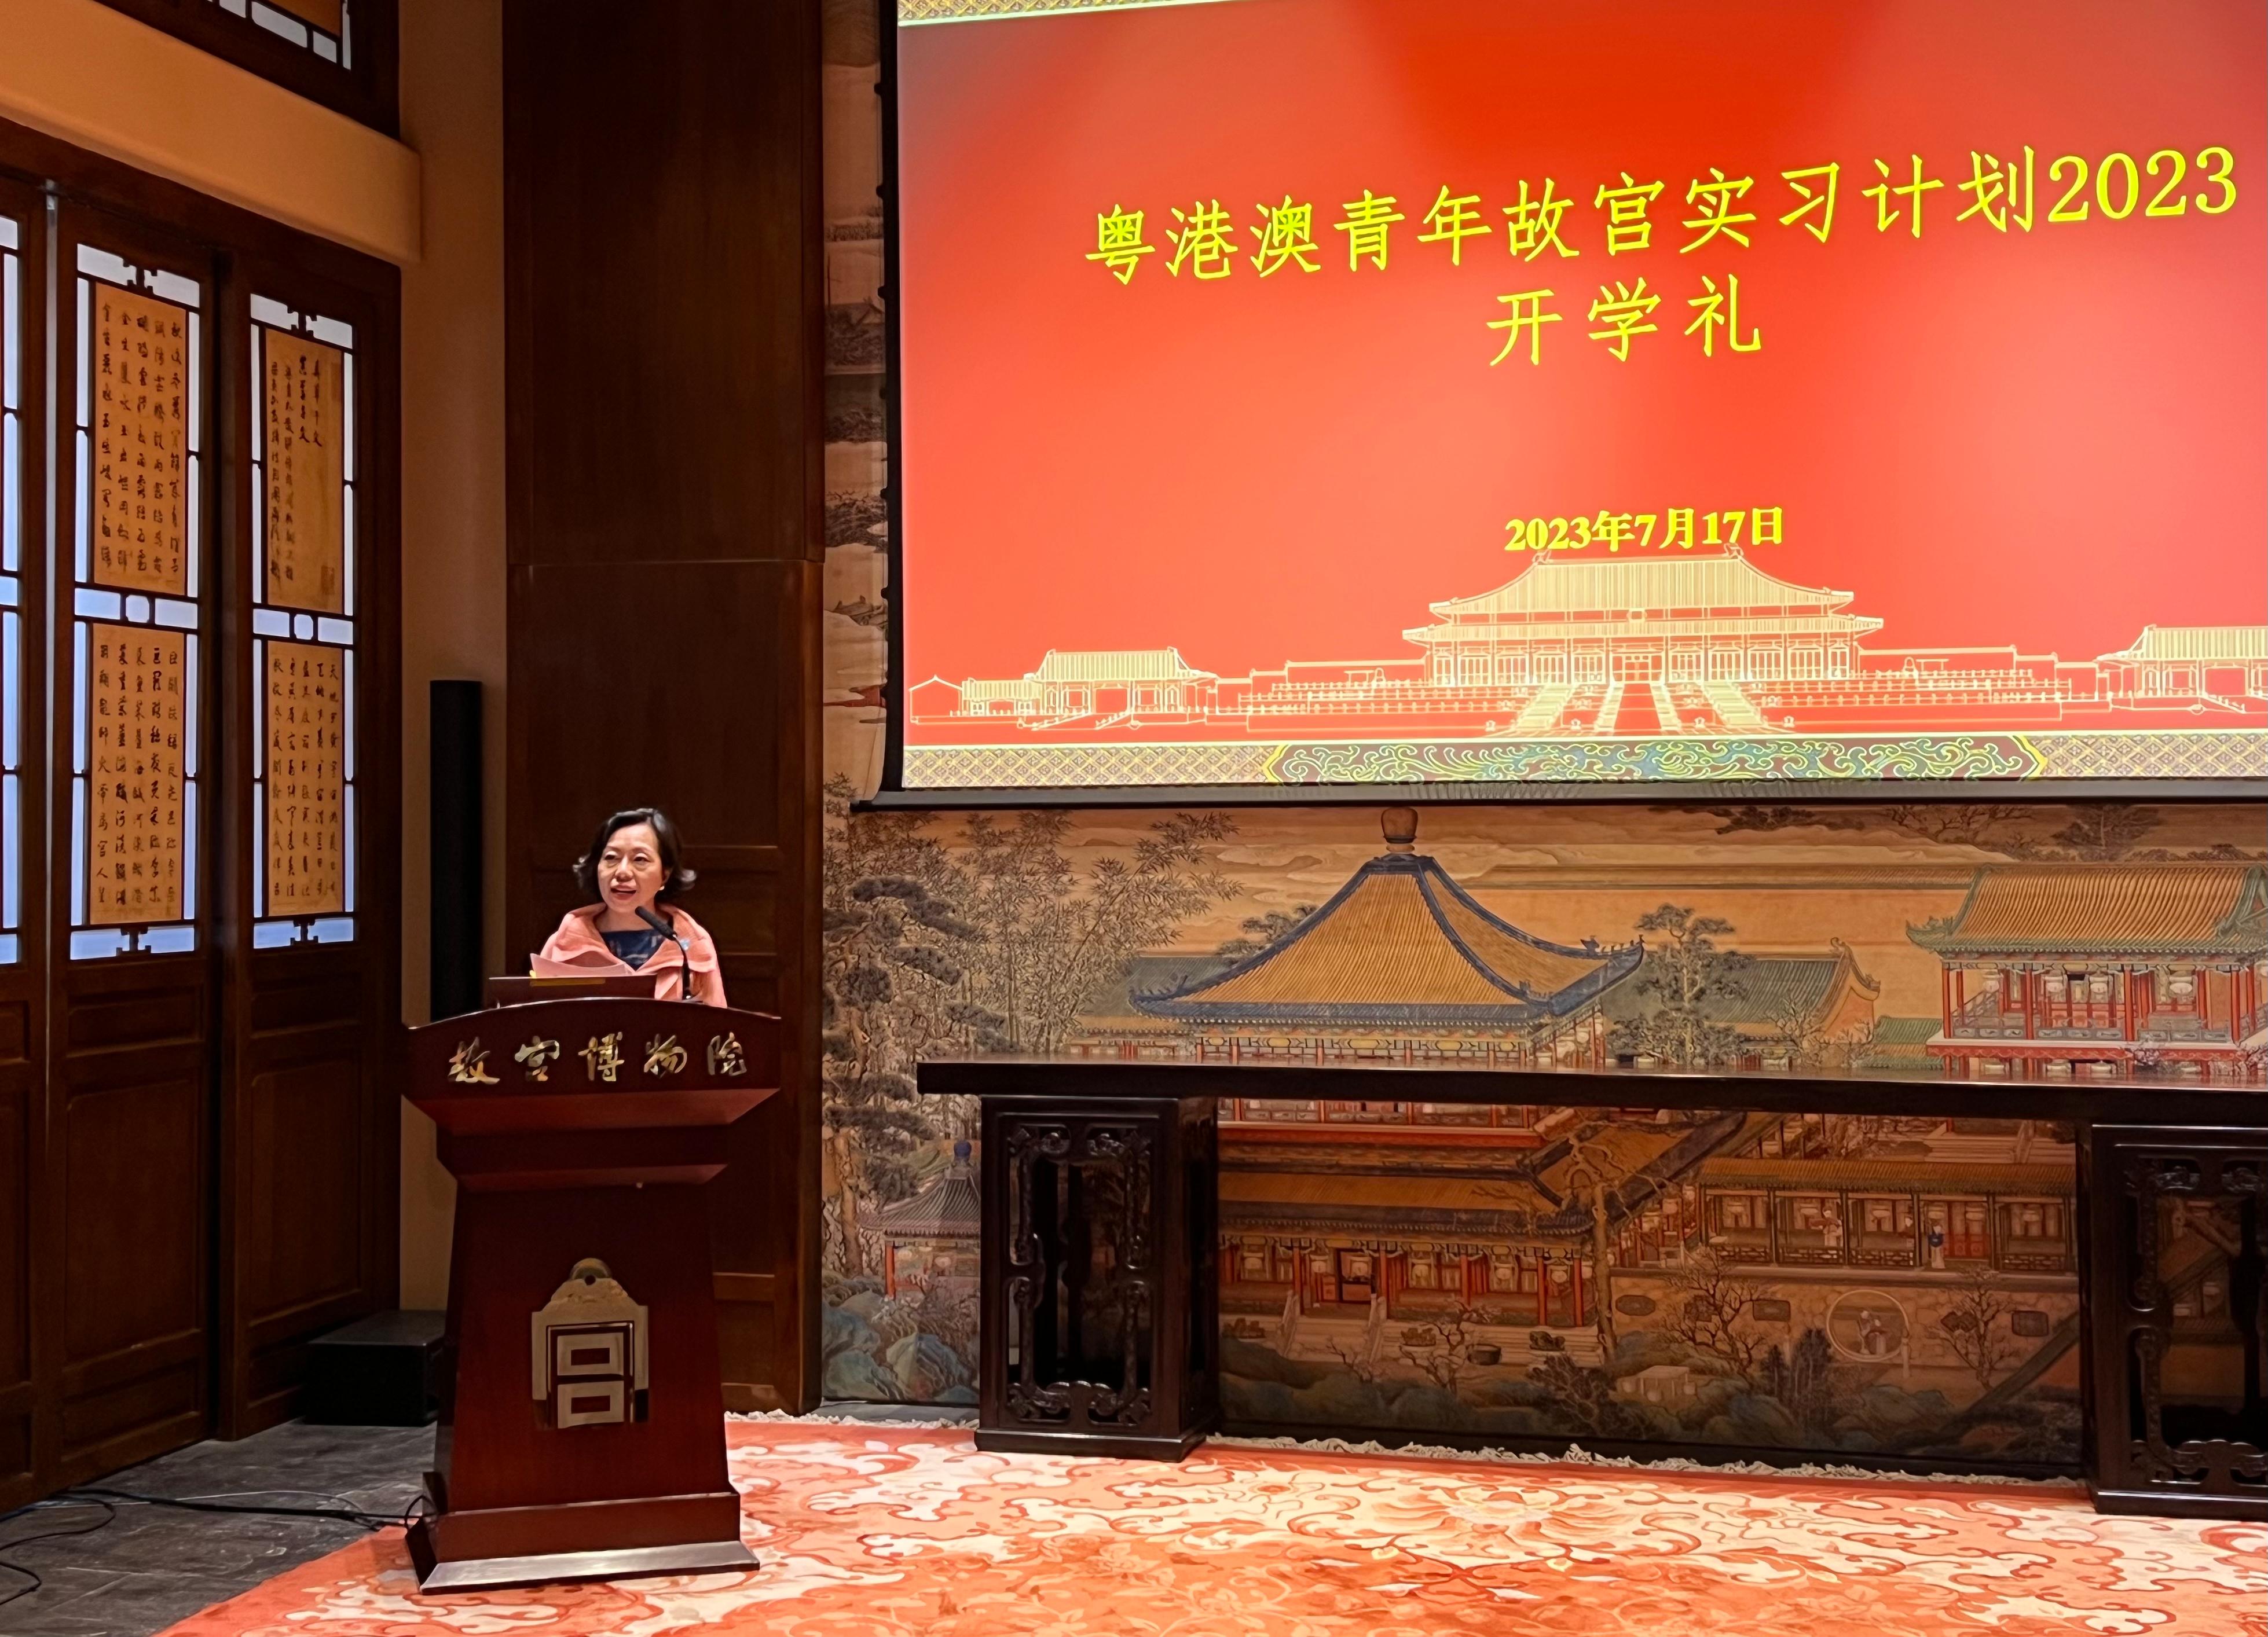 The Secretary for Home and Youth Affairs, Miss Alice Mak, continued her visit in Beijing today (July 17) and arrived at the Palace Museum to officiate at the inauguration ceremony of the Guangdong-Hong Kong-Macao Youth Internship Programme at Palace Museum. Photo shows Miss Mak delivering a speech at the inauguration ceremony.

